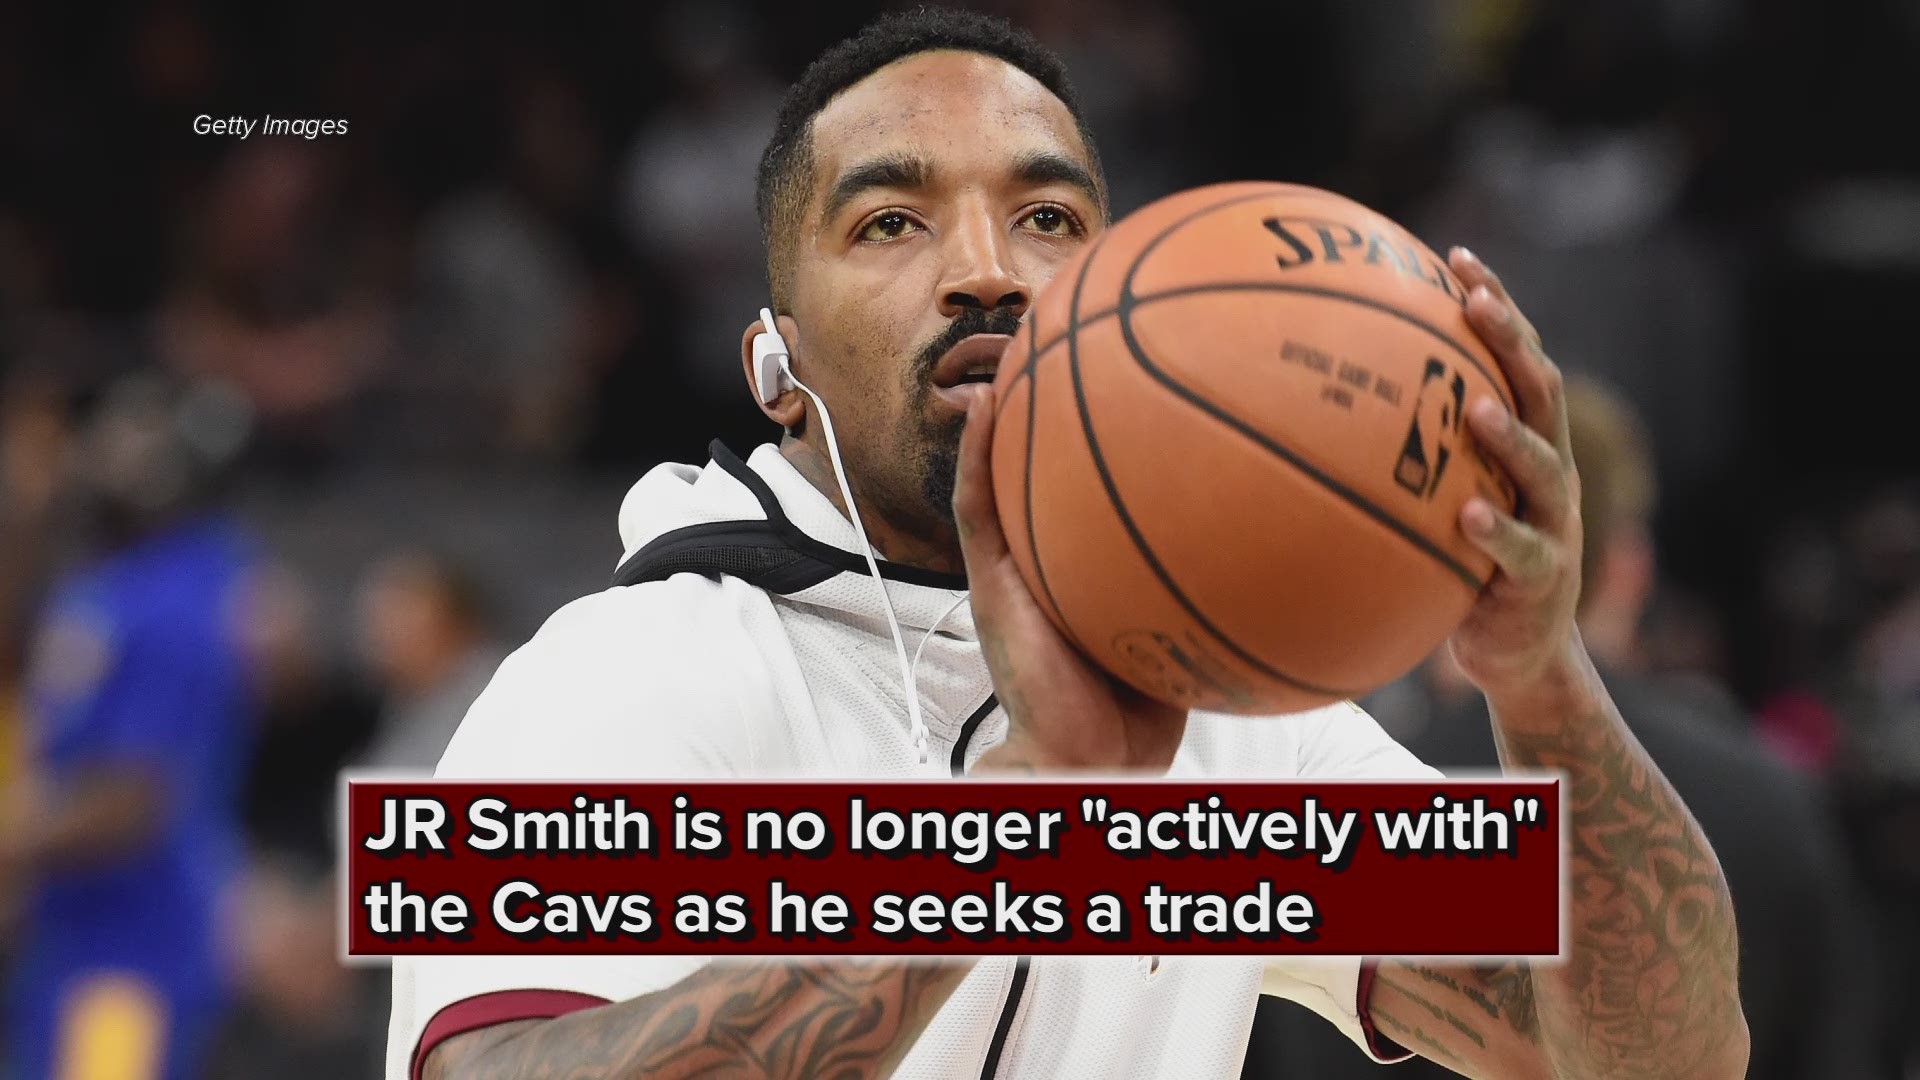 REPORT: J.R. Smith no longer 'actively with' Cleveland Cavaliers, seeking trade